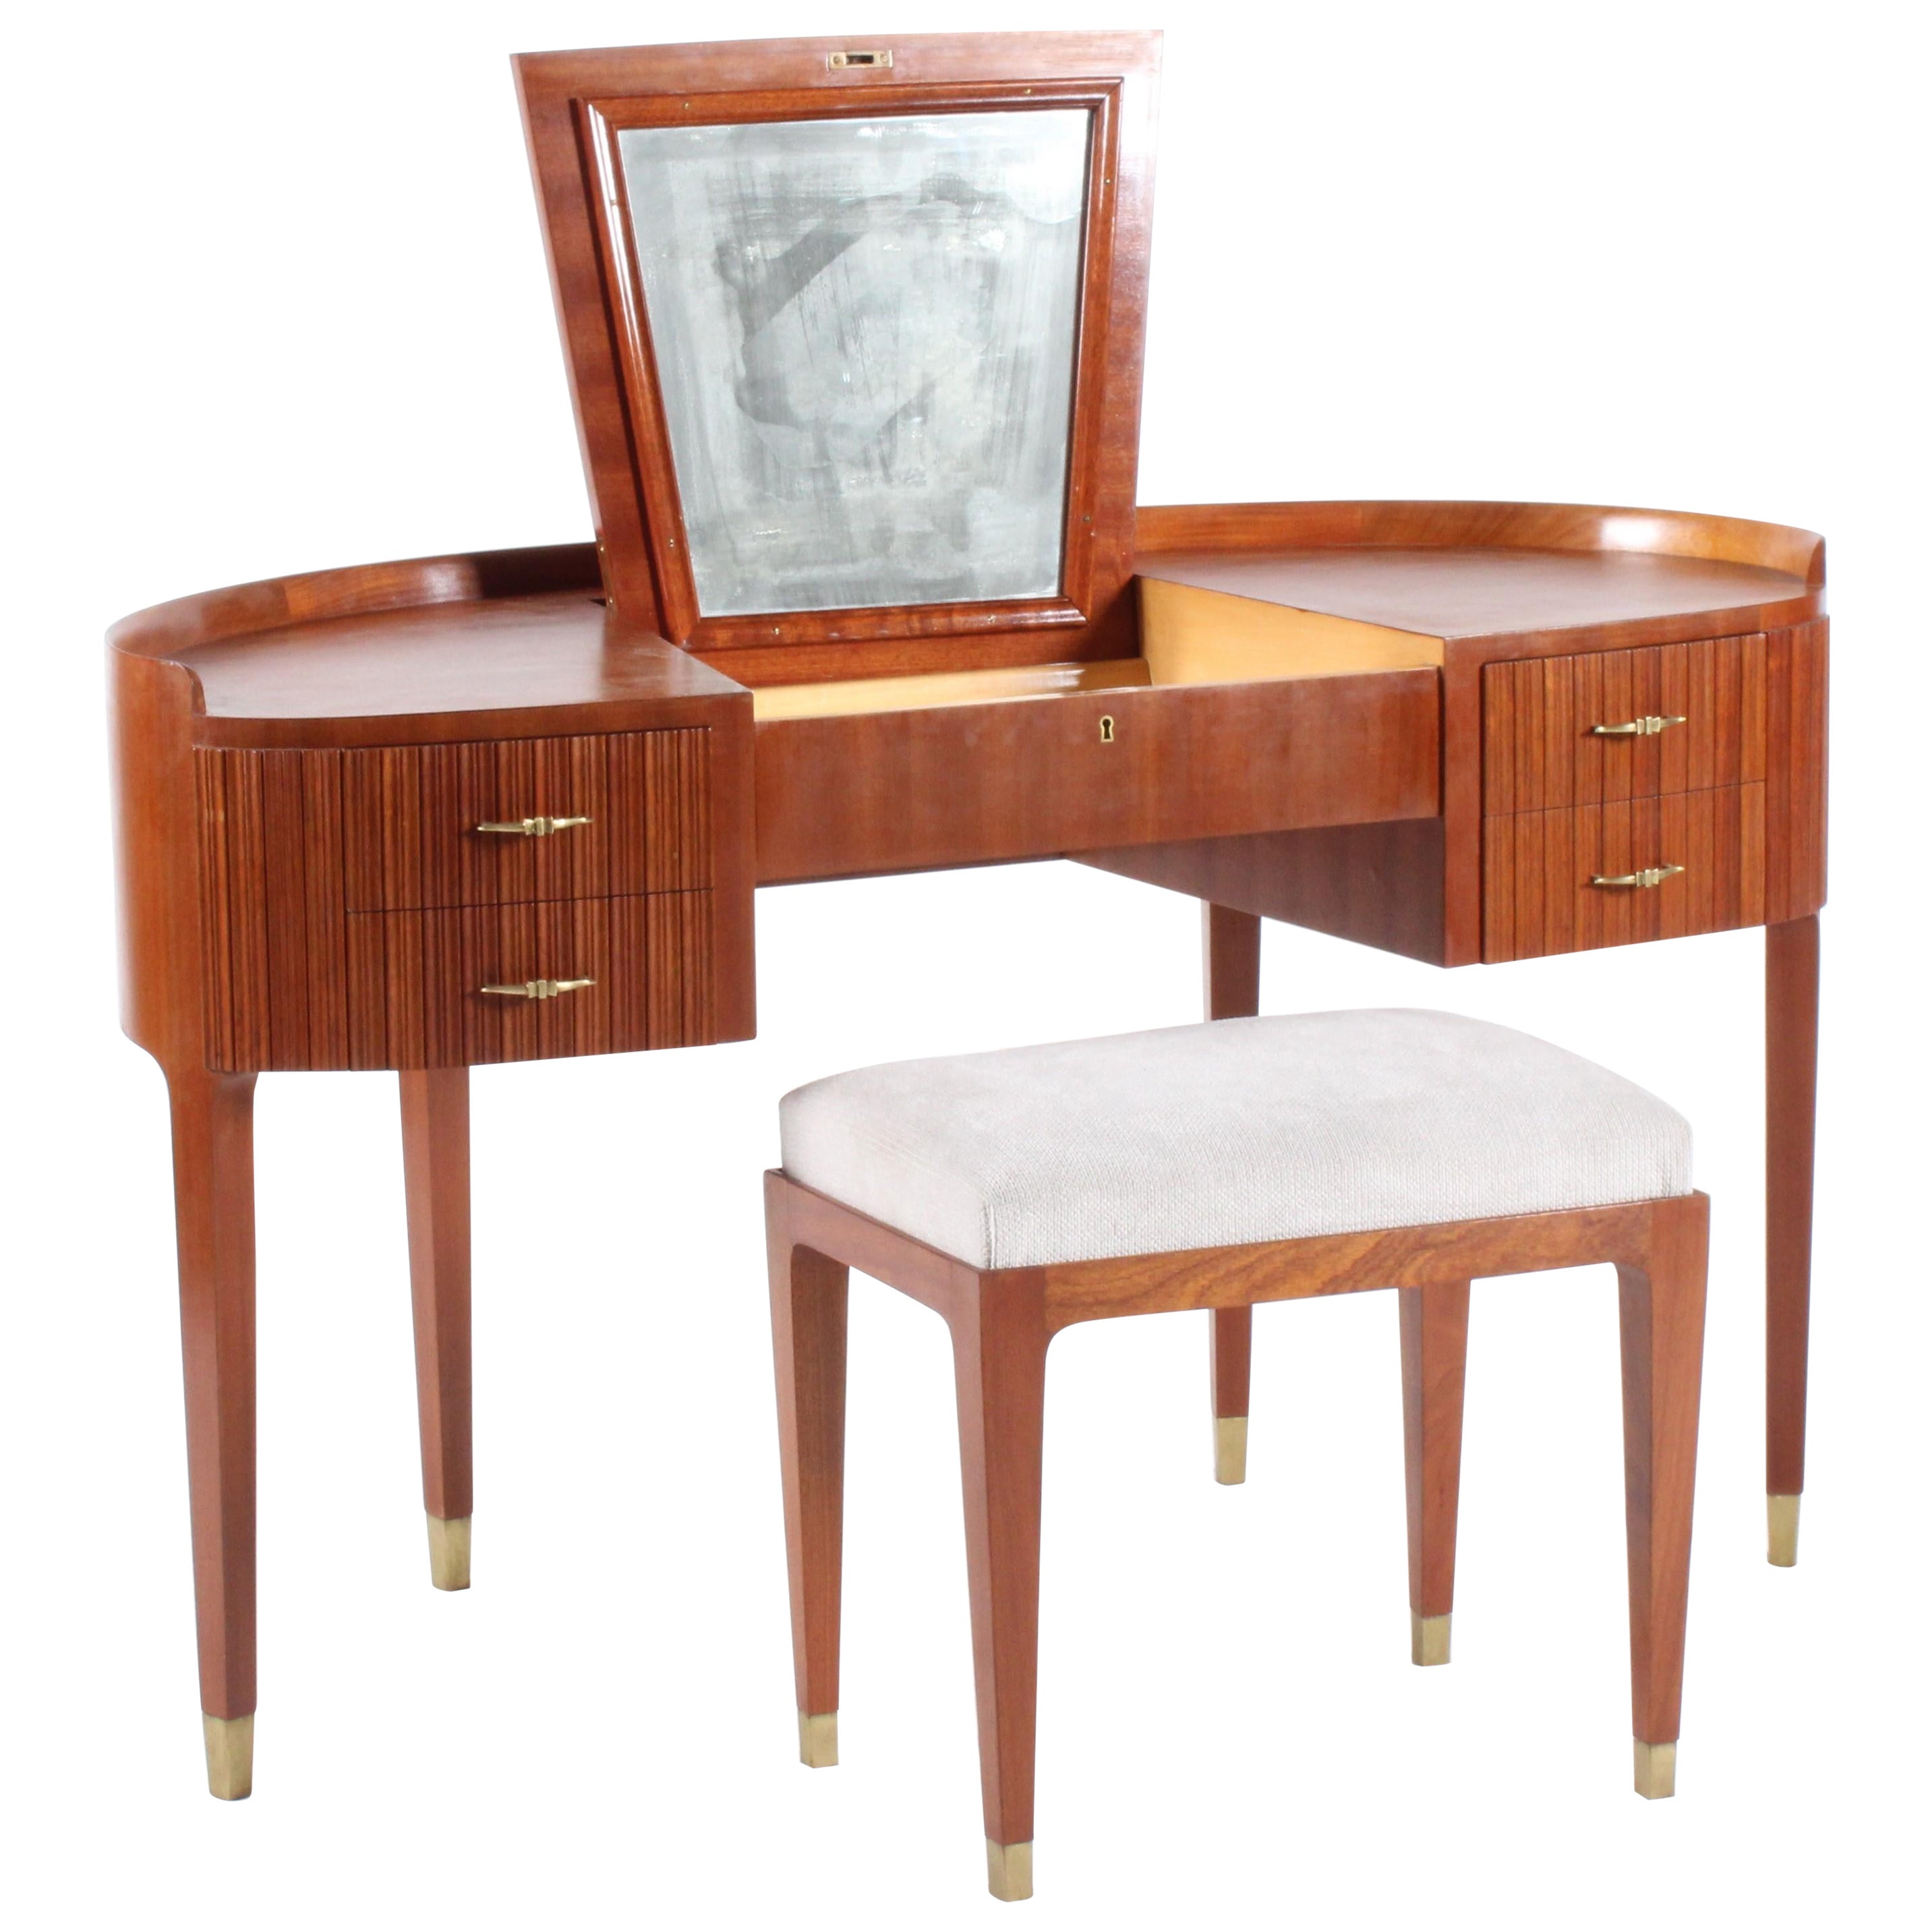 Outstanding Mid Century Italian Dressing Table By Paola Buffa *Free WW Delivery